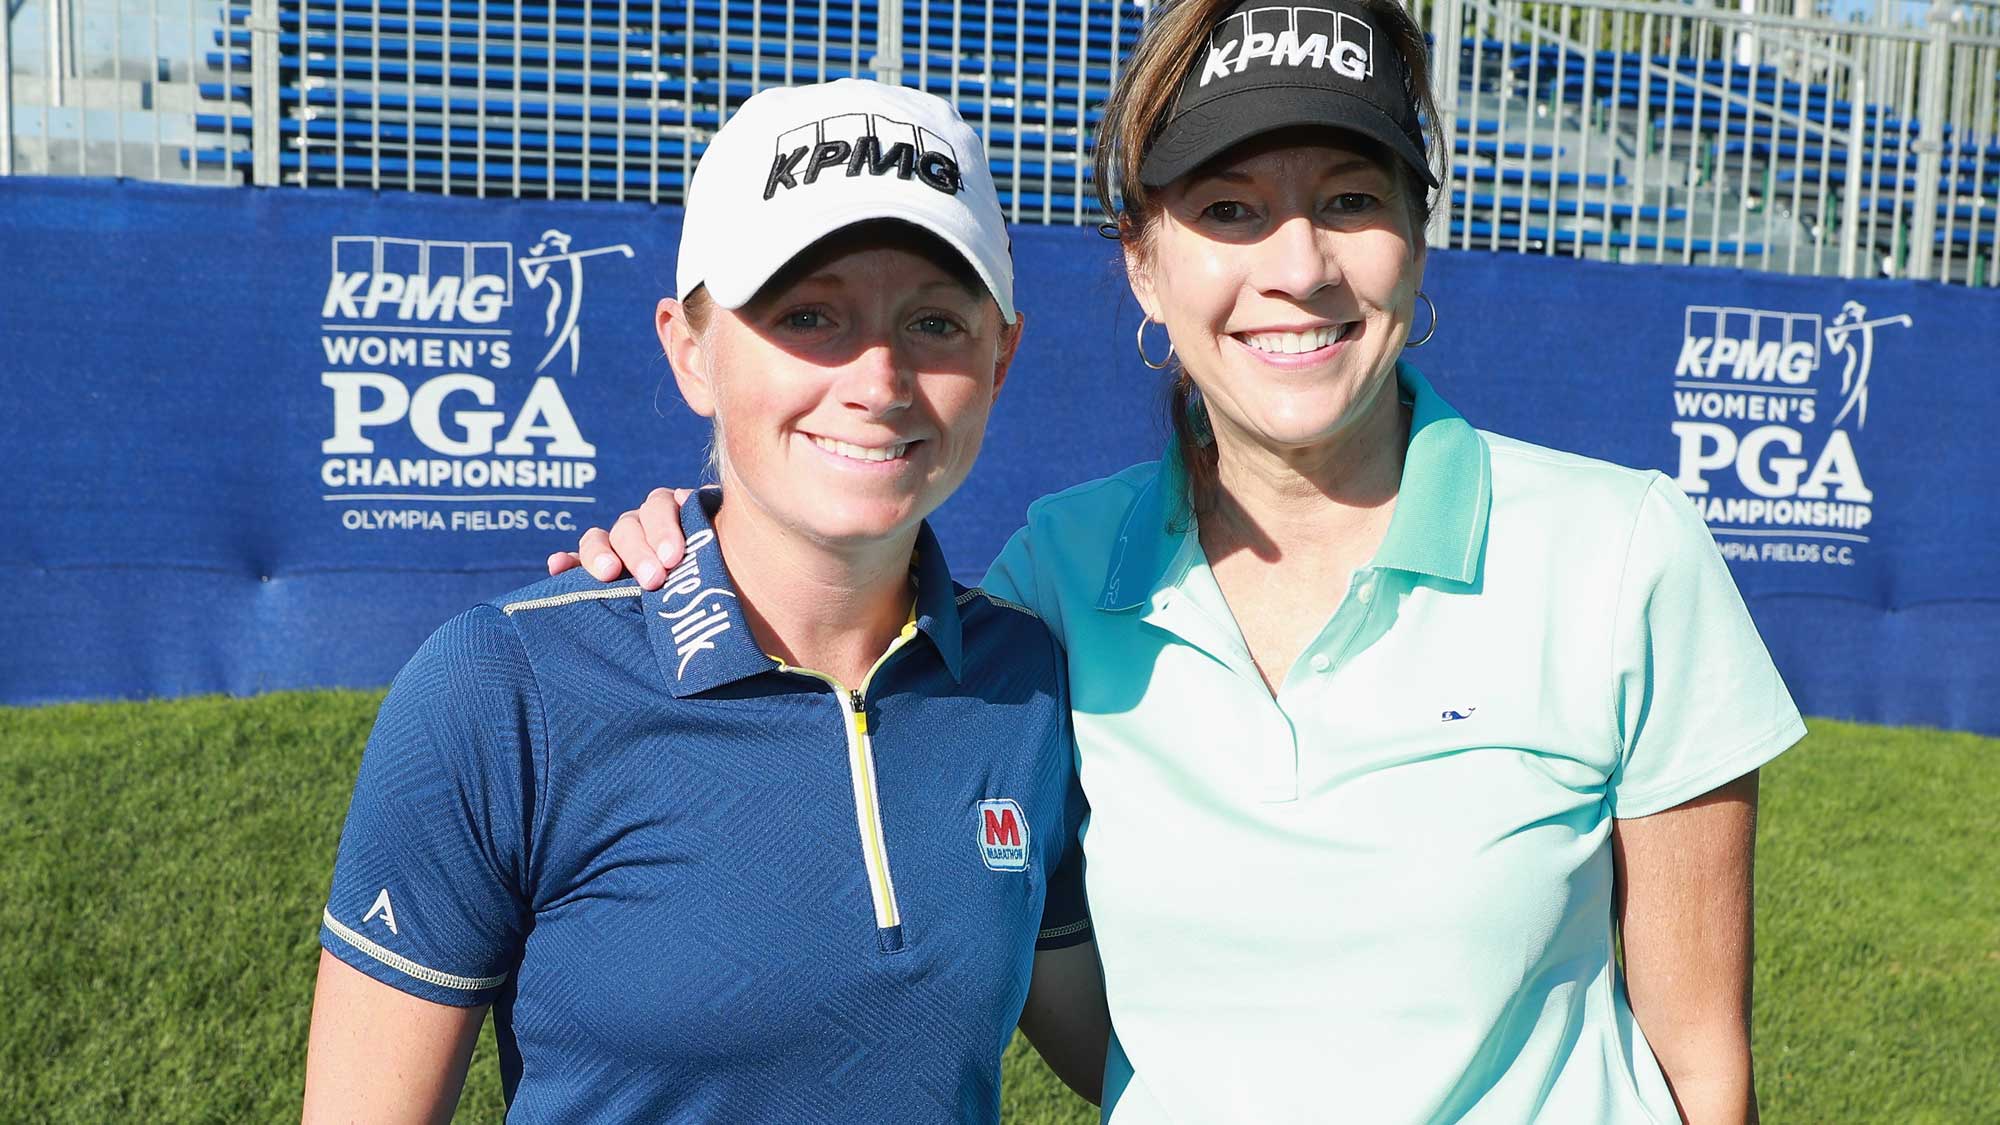 Stacy Lewis (L) poses alongside Lynne Doughtie, Chairman and CEO of KPMG, during the pro-am prior to the start of the 2017 KPMG Women's PGA Championship